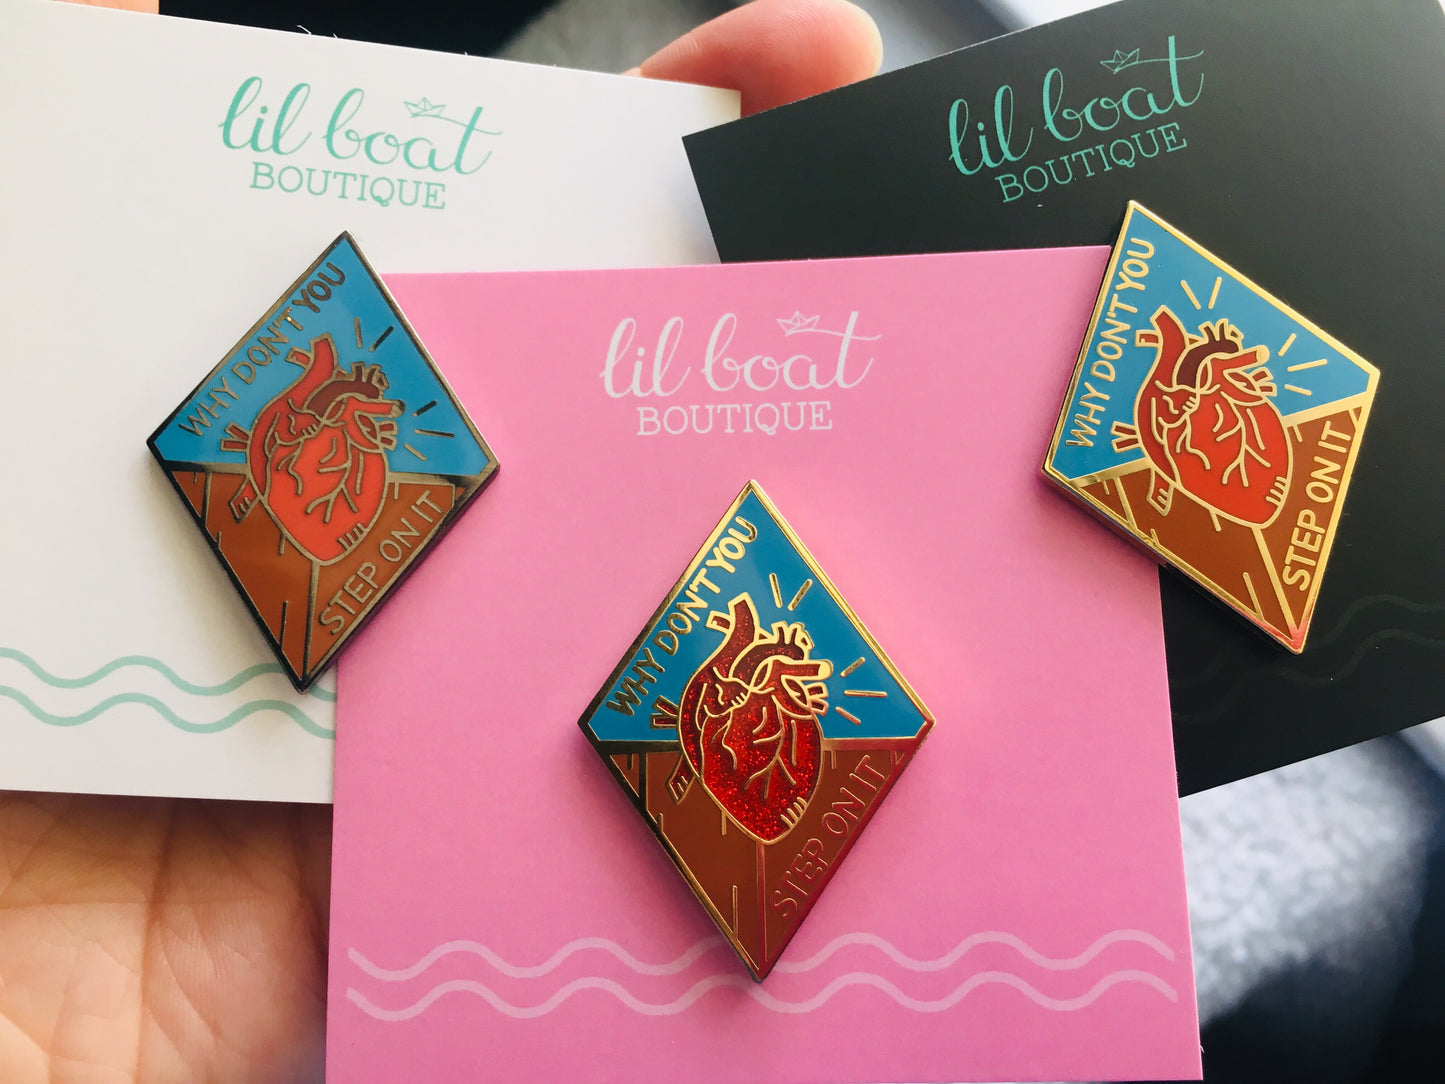 Heart Is On The Floor - Discontinued Pin - Donations to Sexual Assault Survivors